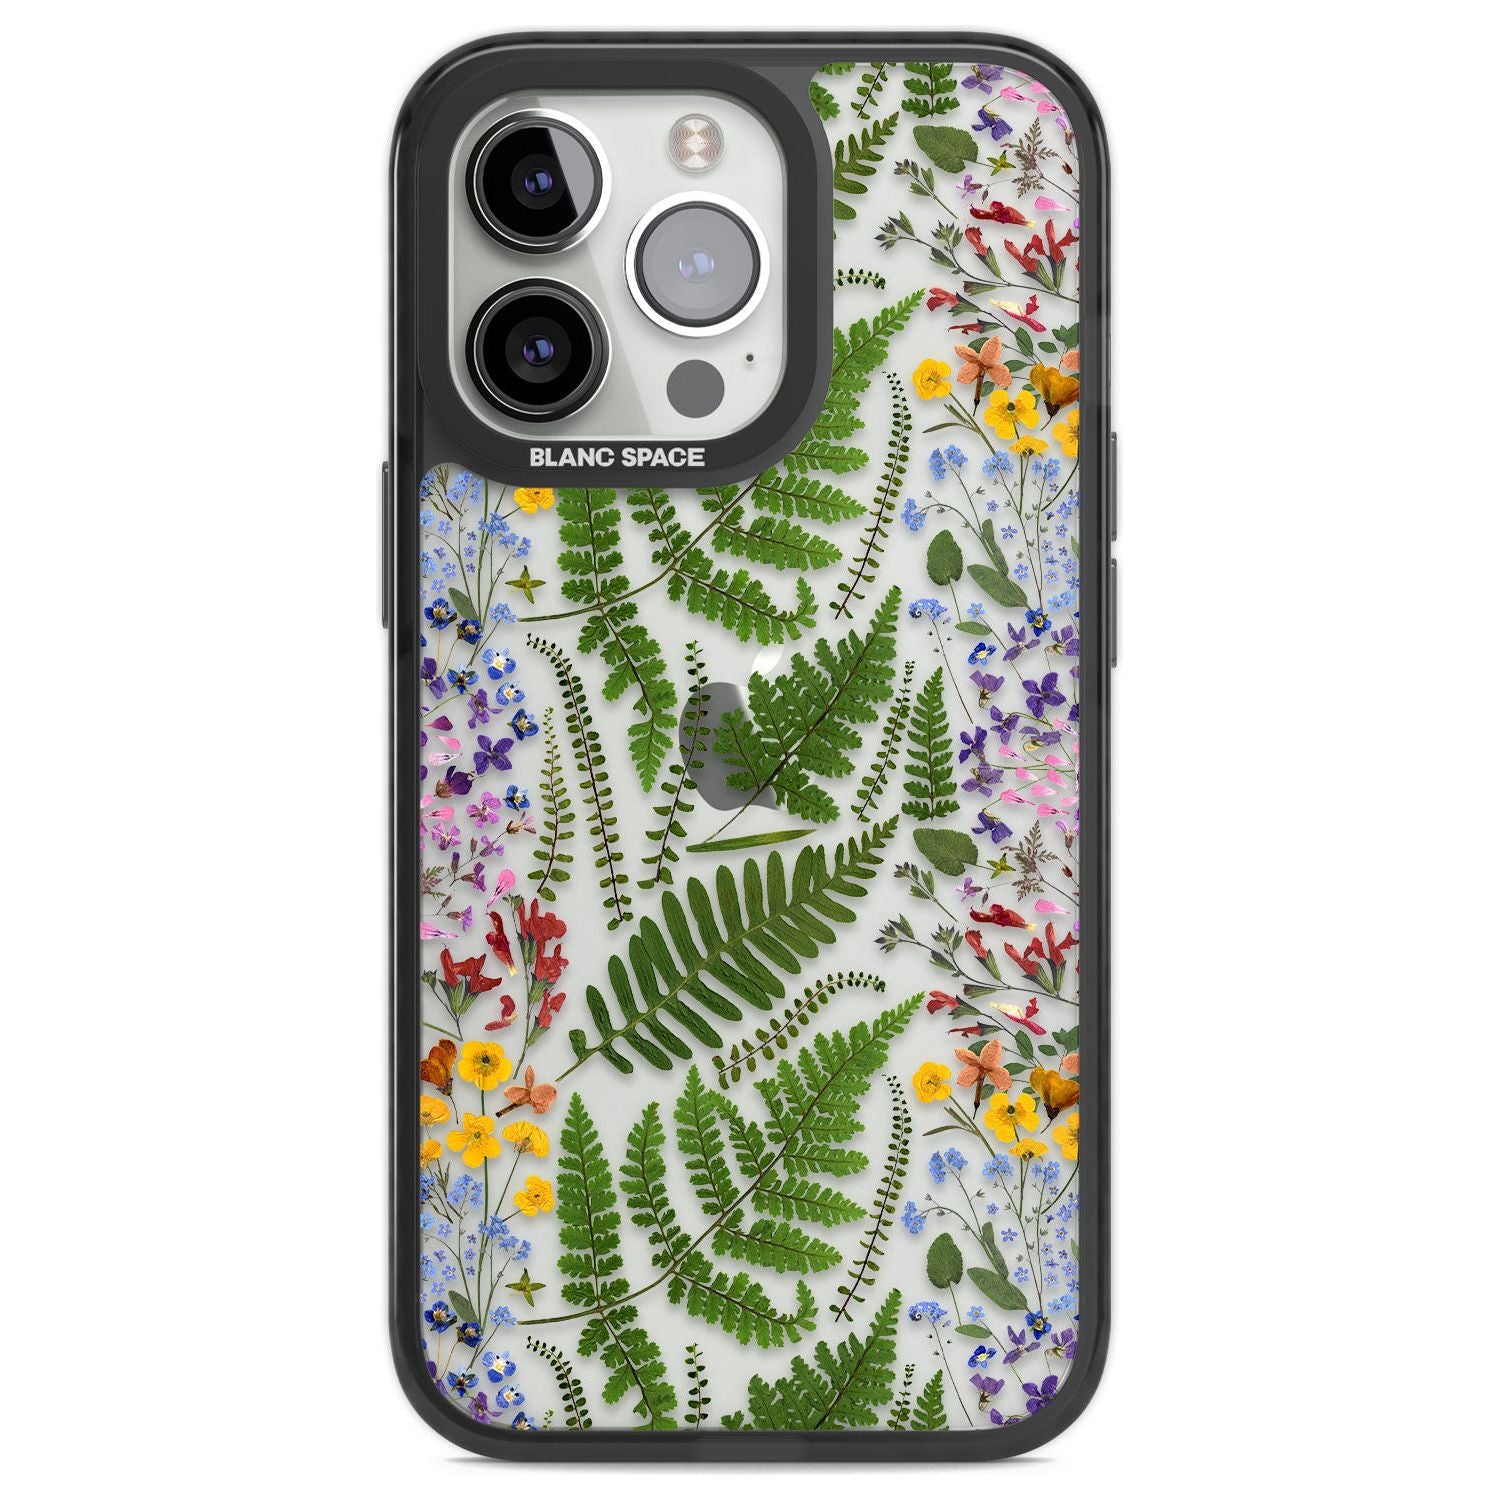 Busy Floral and Fern Design Phone Case iPhone 13 Pro / Black Impact Case,iPhone 14 Pro / Black Impact Case,iPhone 15 Pro Max / Black Impact Case,iPhone 15 Pro / Black Impact Case Blanc Space